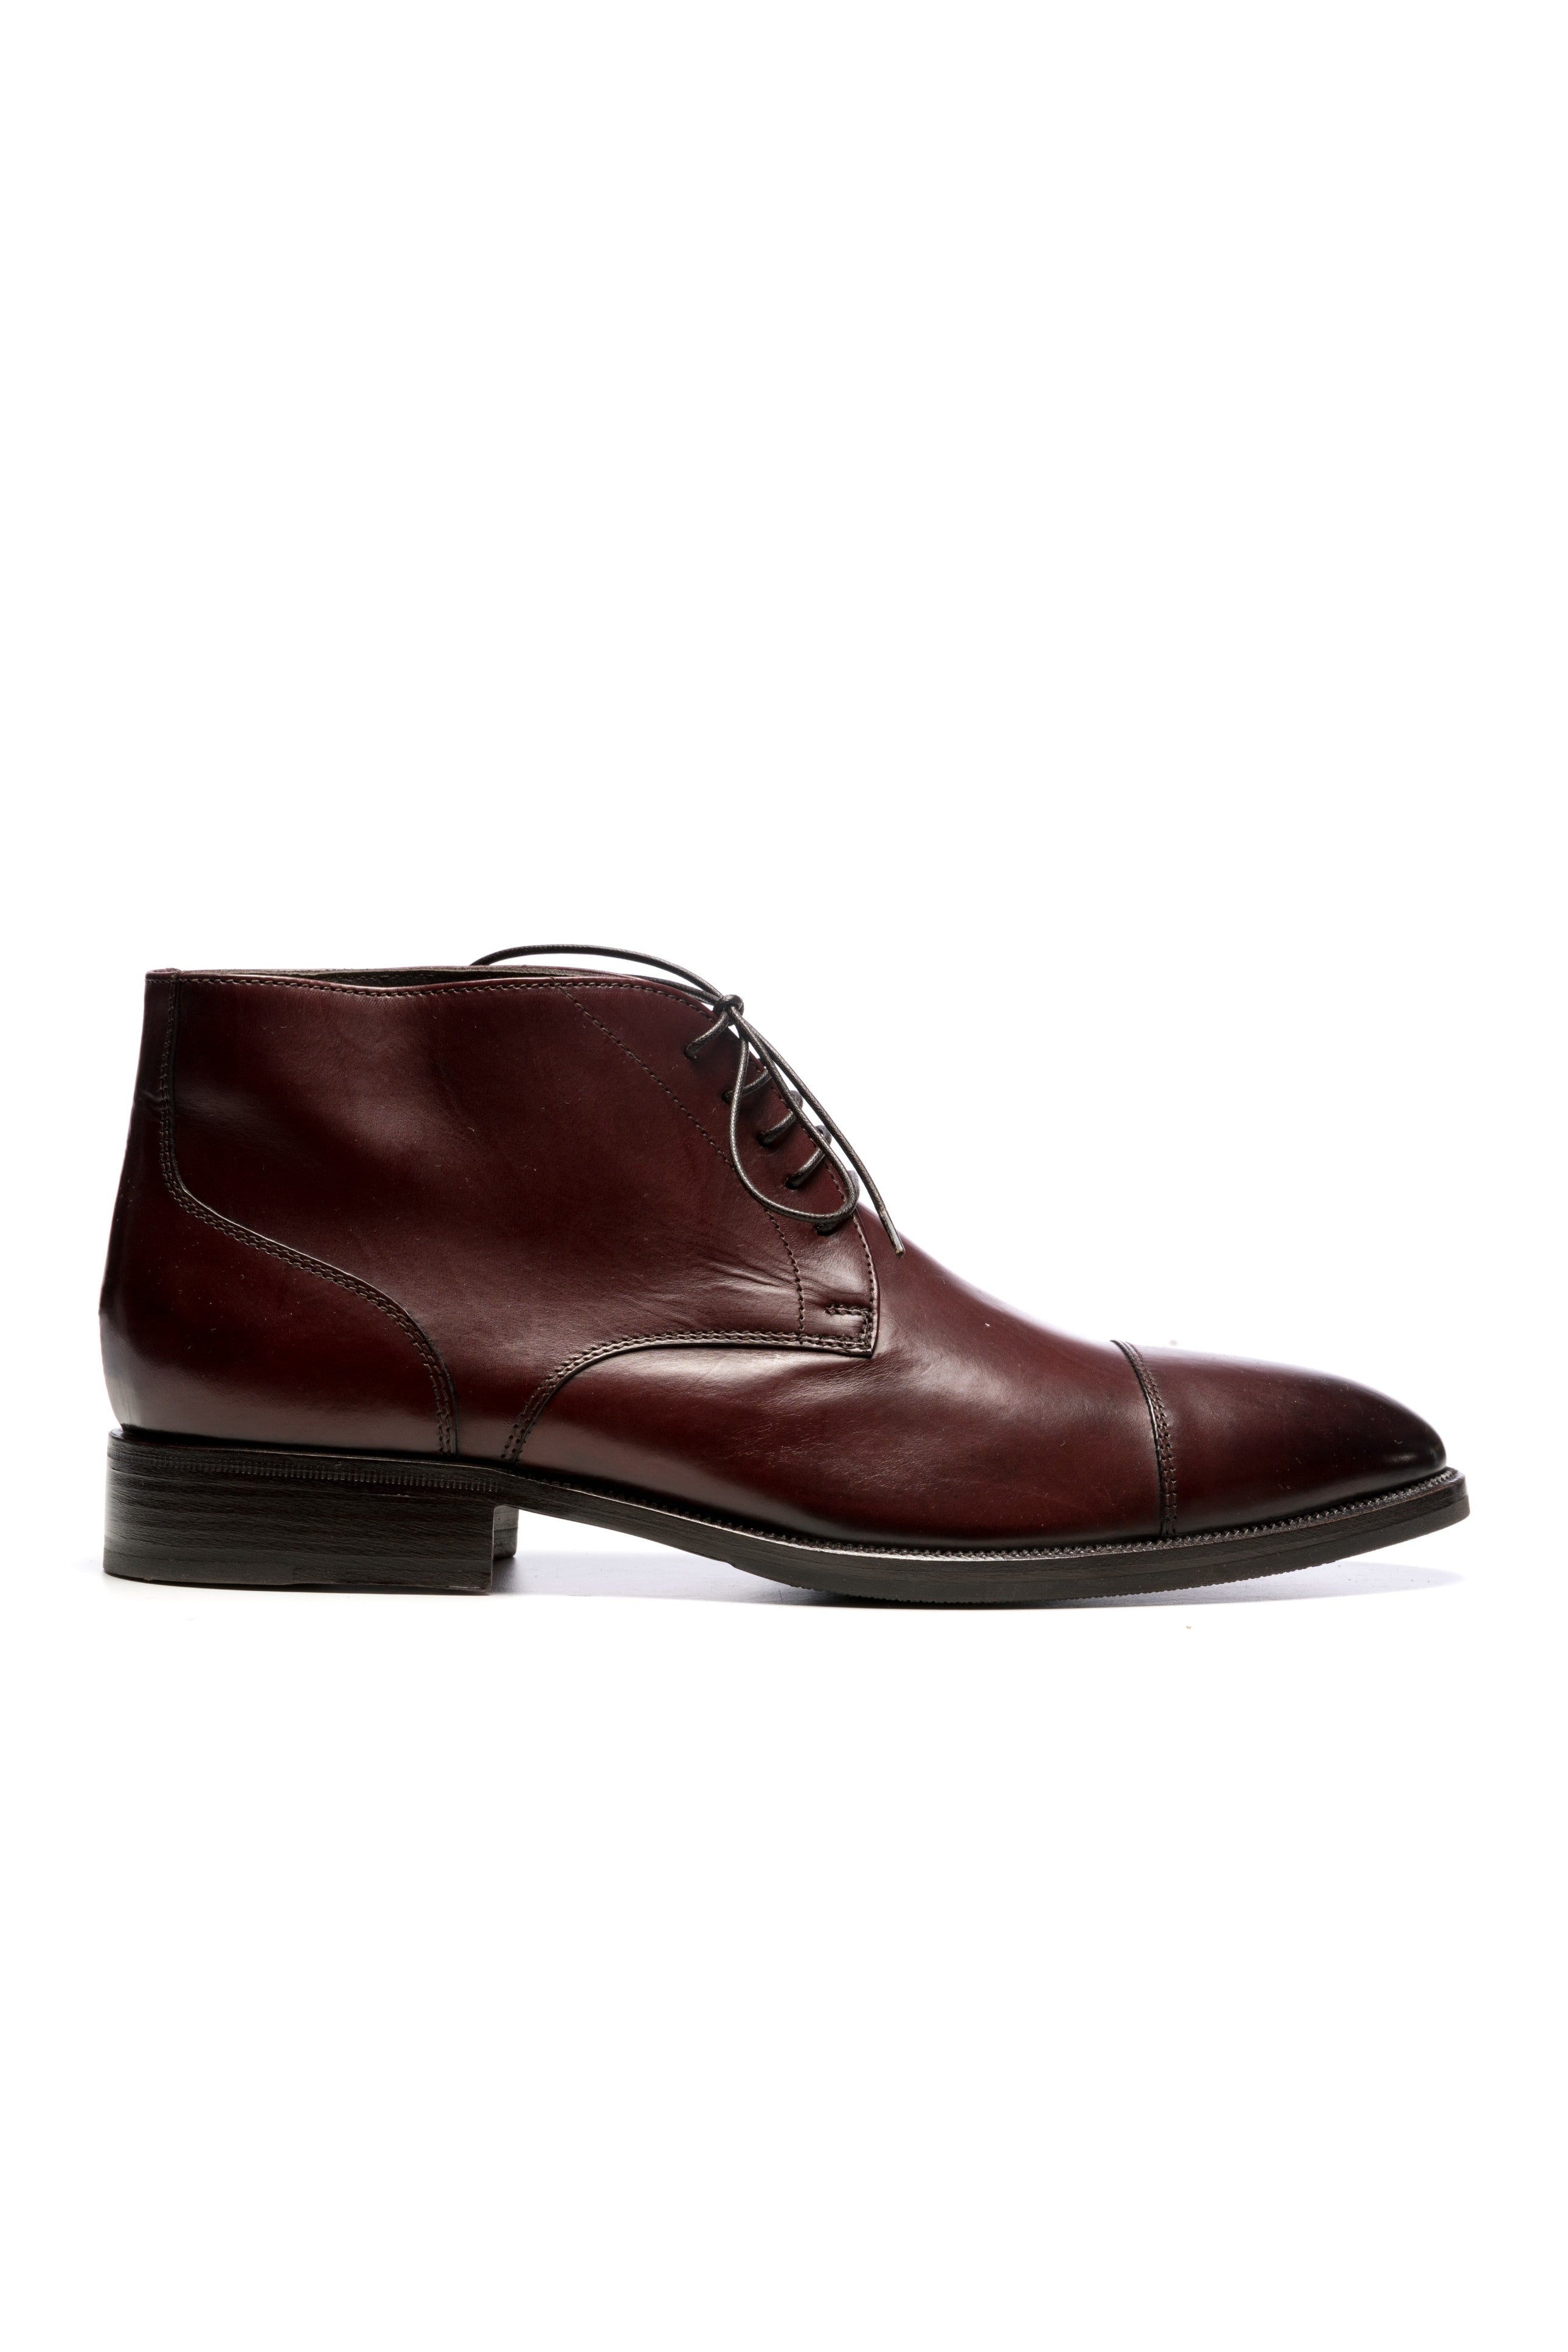 Burgundy business boots